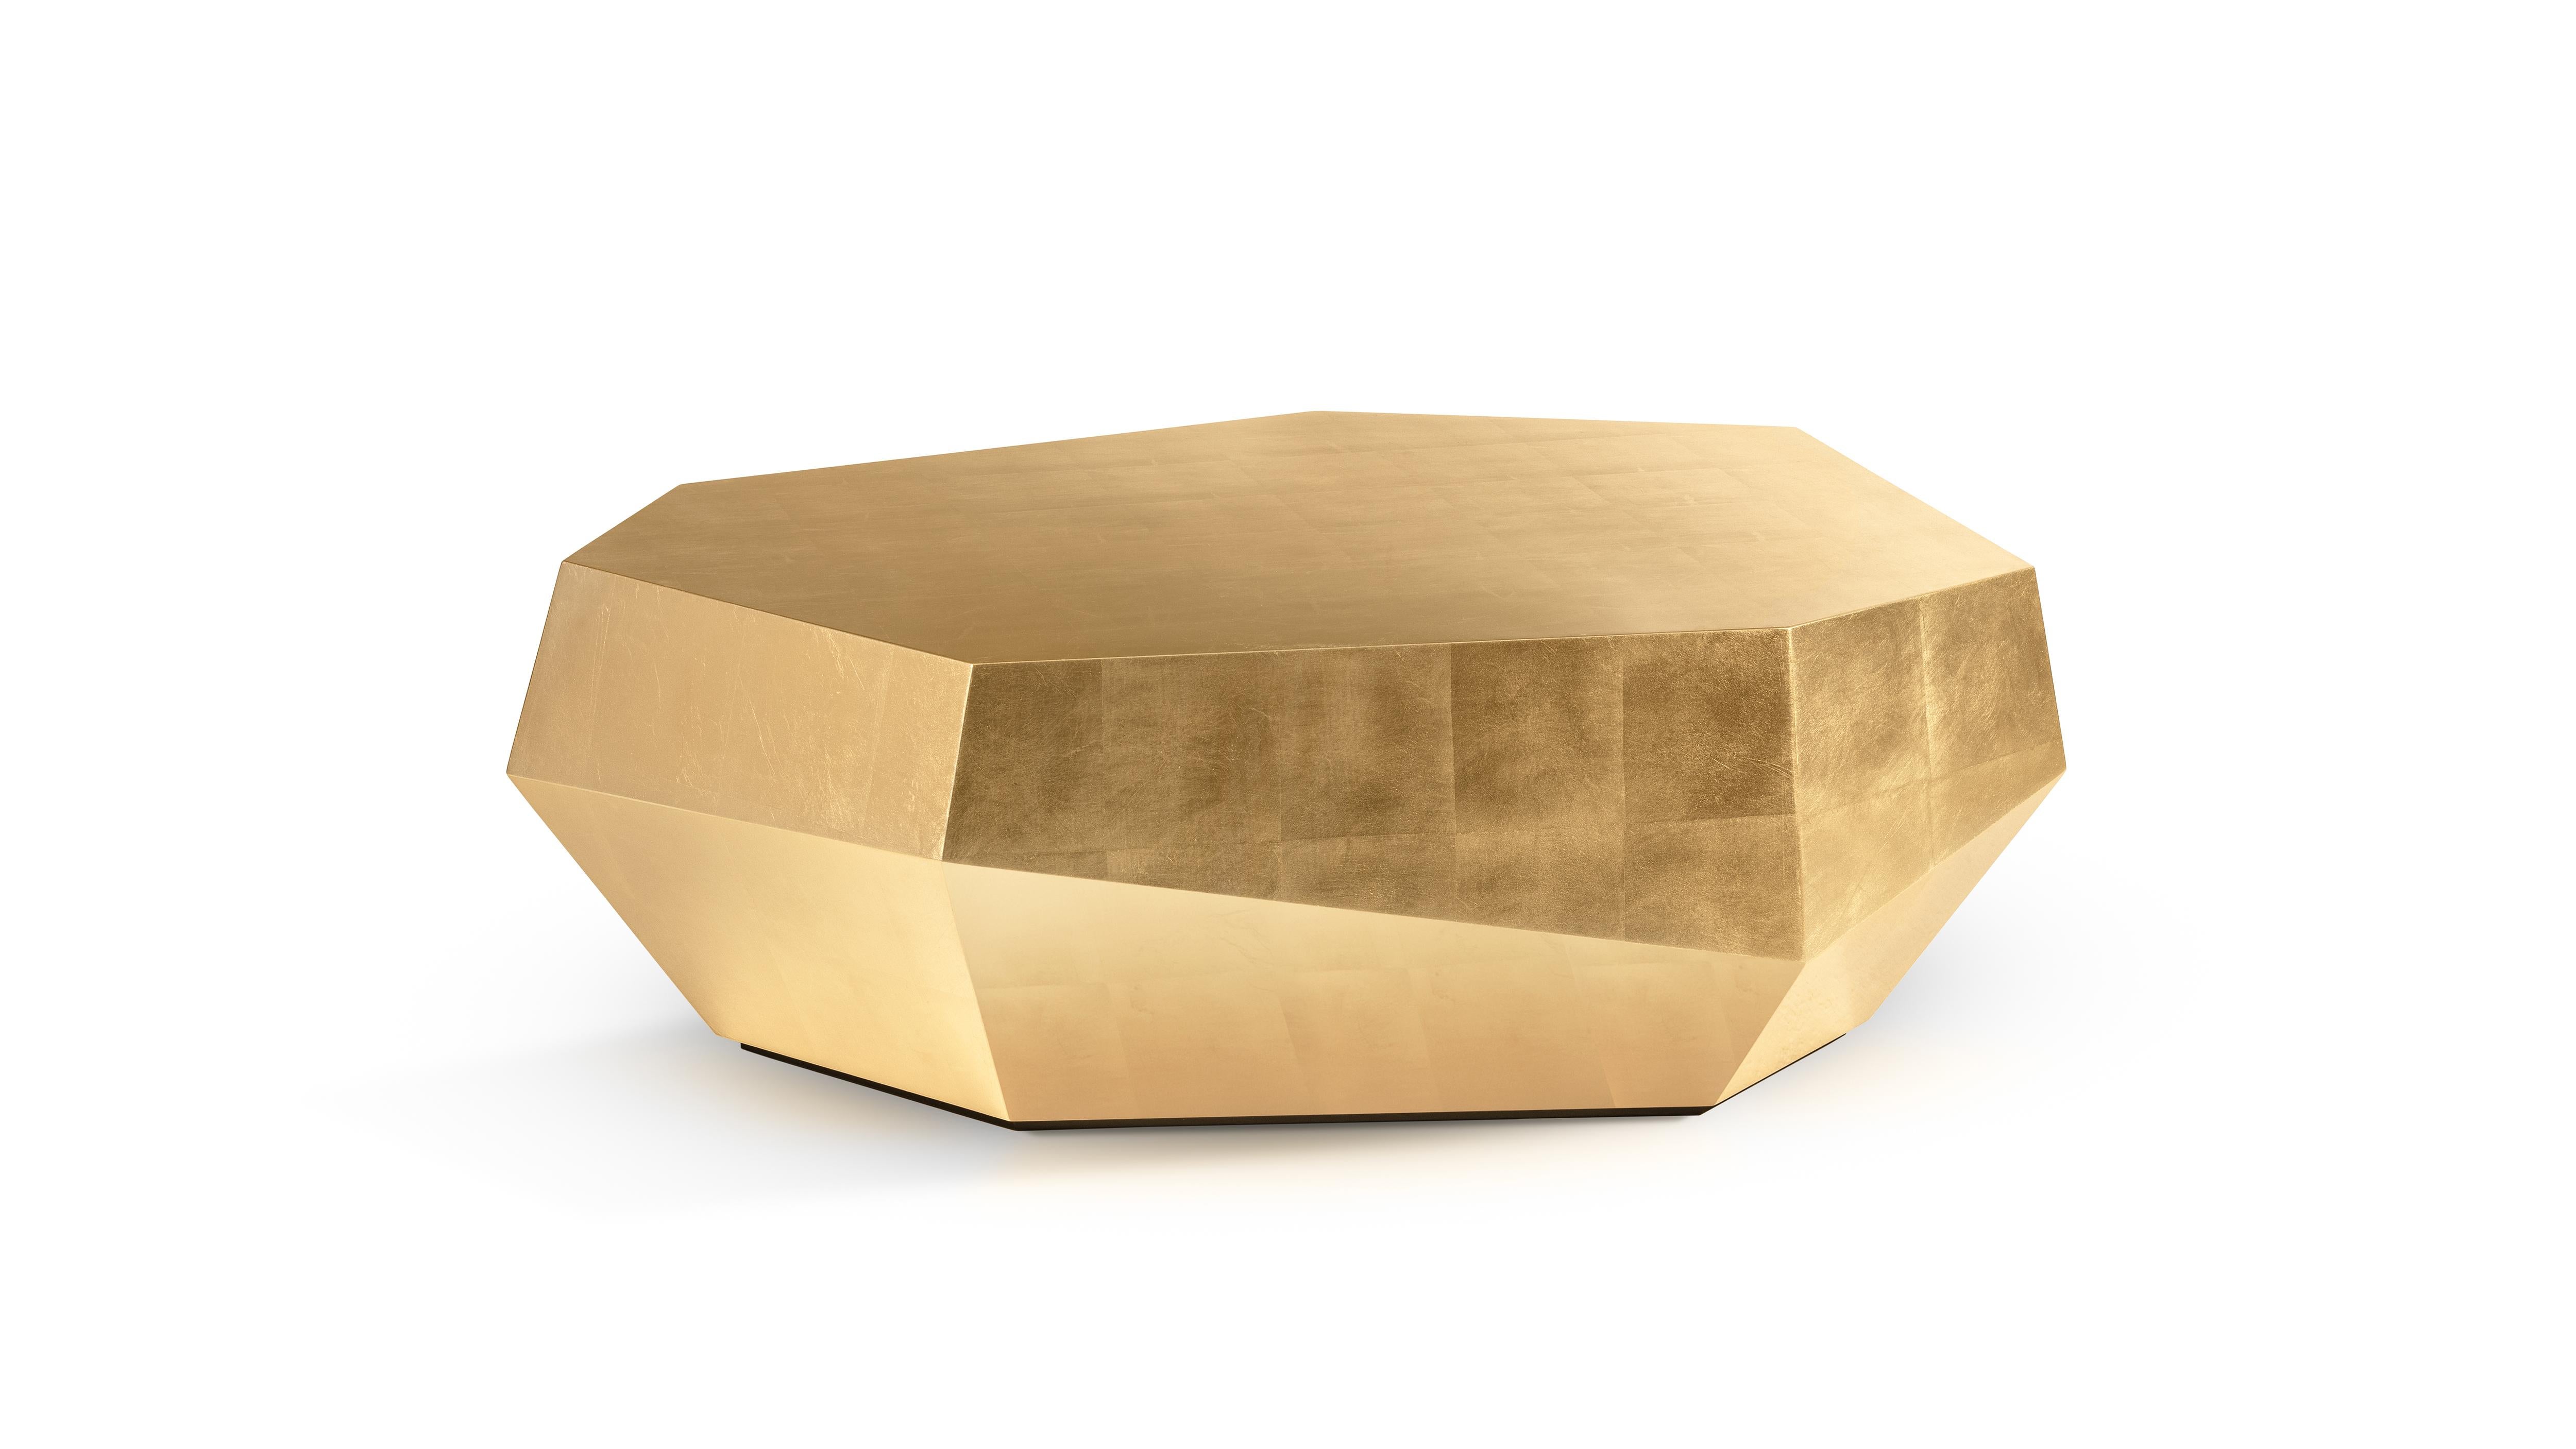 Low Three Rocks Gold Leaf Coffee Table by InsidherLand
Dimensions: D 75 x W 112 x H 37 cm.
Materials: Gold Leaf.
19 kg.
Other materials available.

From The Special Tree, Fallen Leaves on the water reflected the faces of two lovers as mirrors, while